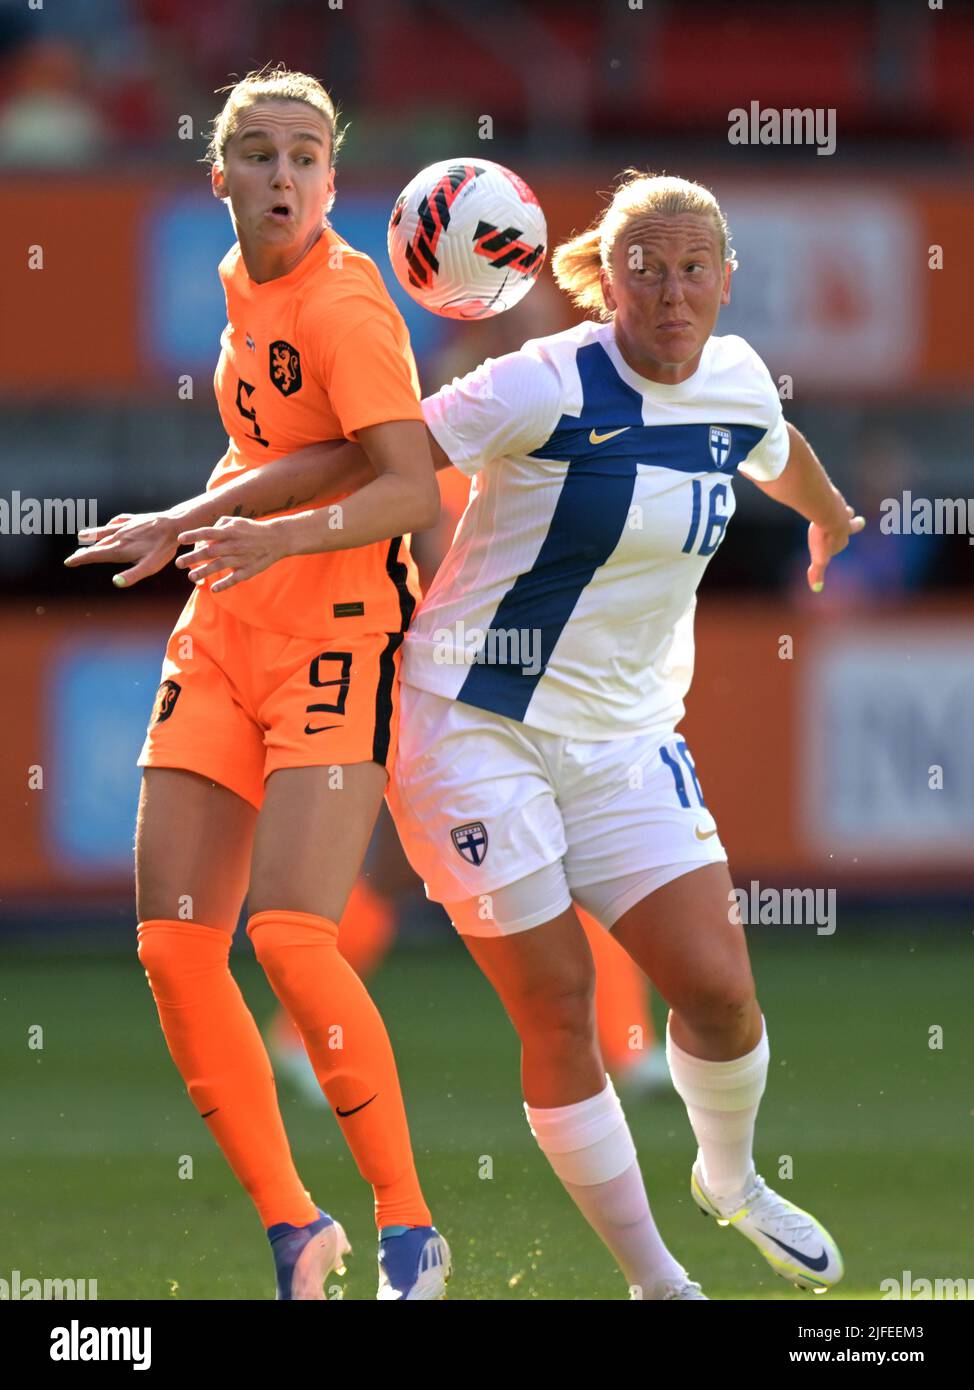 ENSCHEDE - (lr) Vivianne Miedema of Holland women, Anna Westerlund of Finland women during the women's friendly match between the Netherlands and Finland at Stadium De Grolsch Veste on July 2, 2022 in Enschede, Netherlands. ANP GERRIT VAN COLOGNE Stock Photo